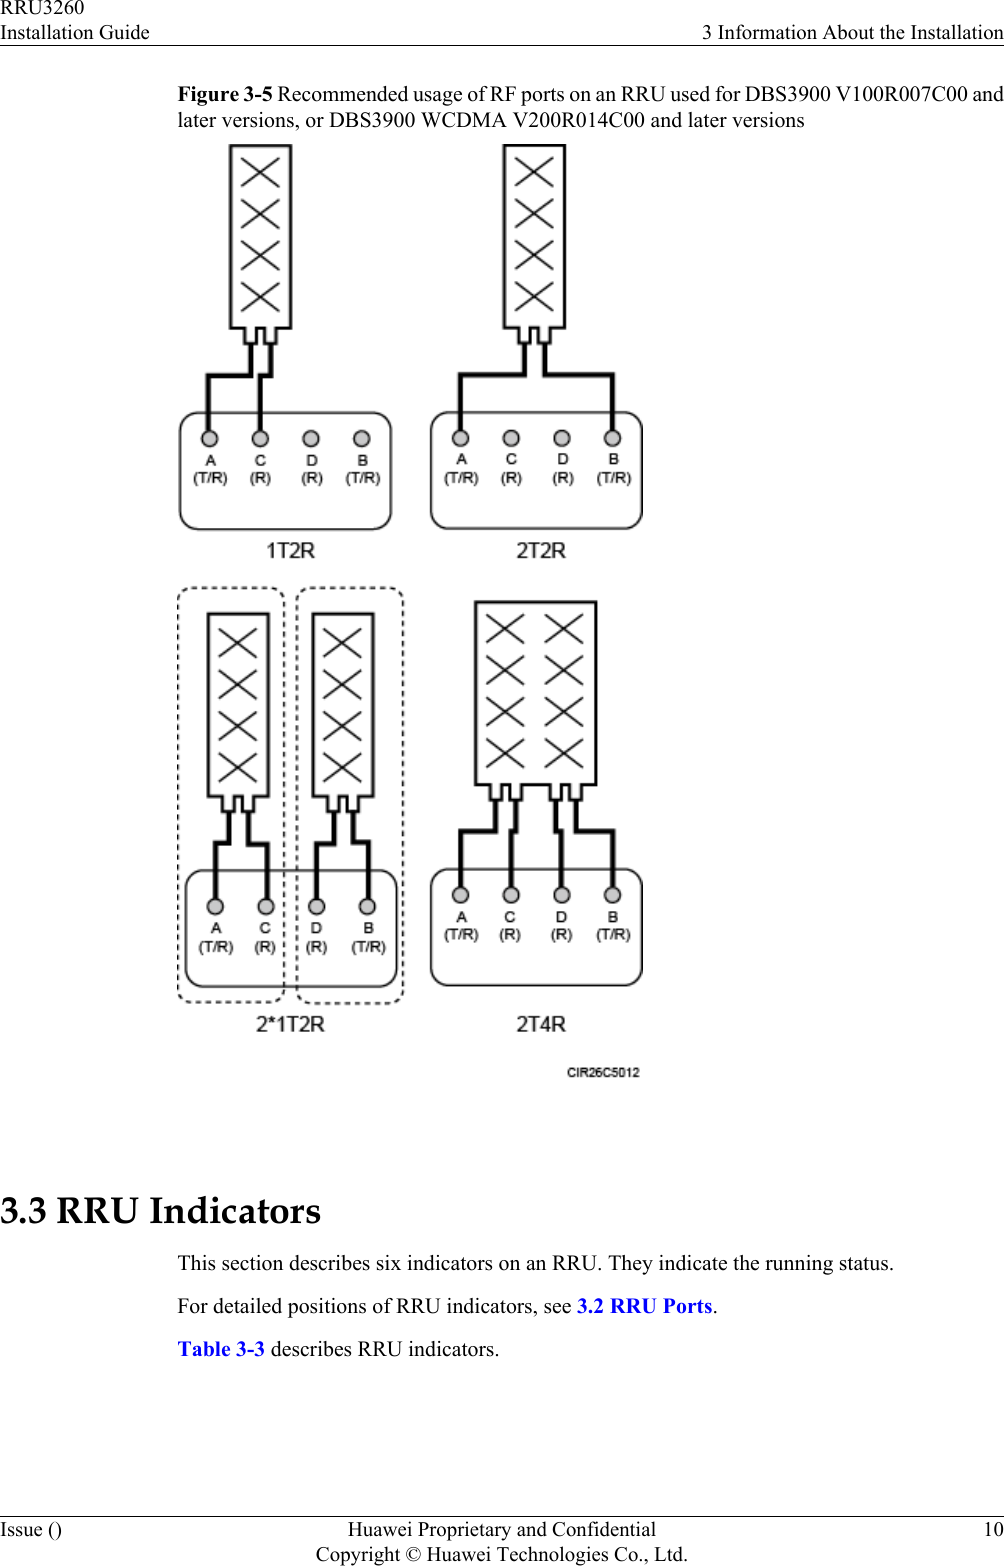 Figure 3-5 Recommended usage of RF ports on an RRU used for DBS3900 V100R007C00 andlater versions, or DBS3900 WCDMA V200R014C00 and later versions 3.3 RRU IndicatorsThis section describes six indicators on an RRU. They indicate the running status.For detailed positions of RRU indicators, see 3.2 RRU Ports.Table 3-3 describes RRU indicators.RRU3260Installation Guide 3 Information About the InstallationIssue () Huawei Proprietary and ConfidentialCopyright © Huawei Technologies Co., Ltd.10